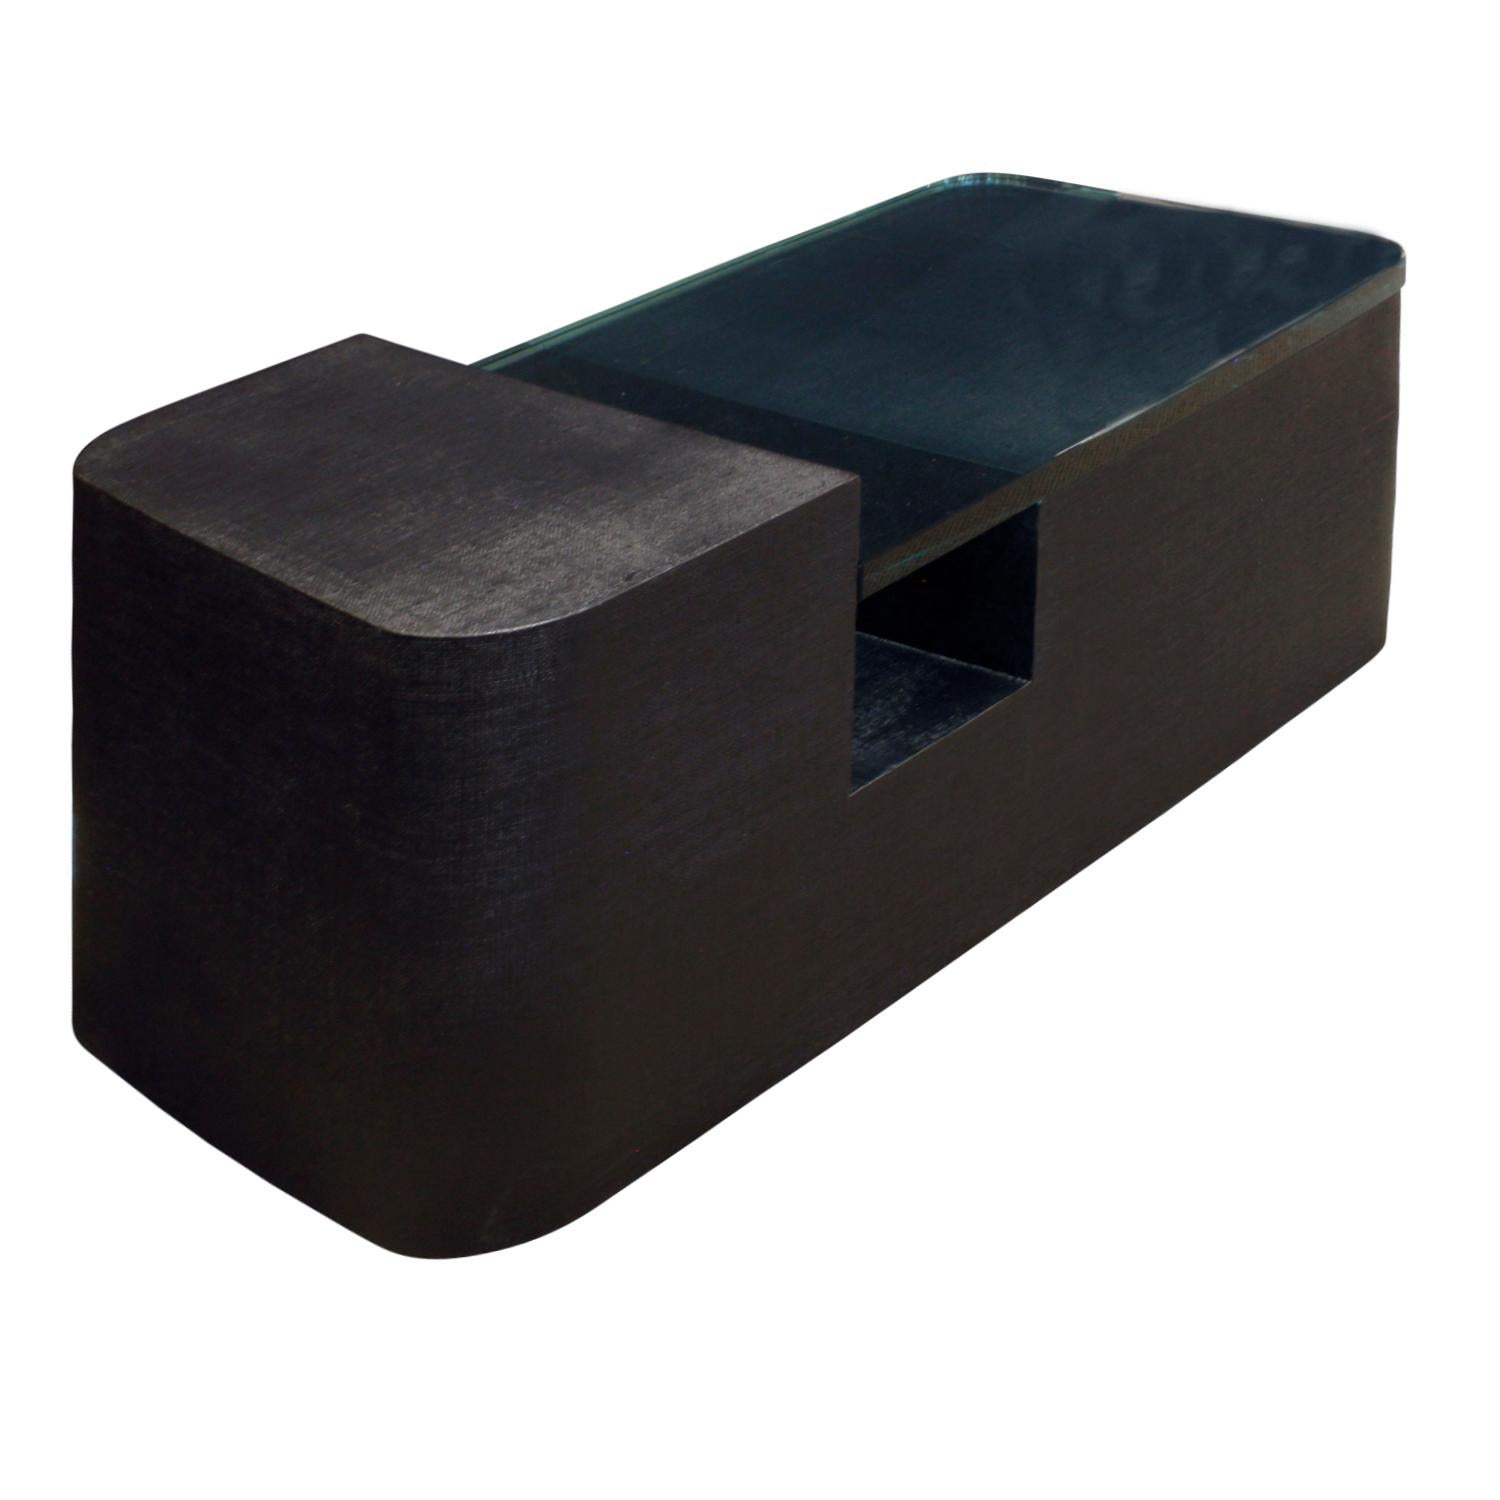 Sculptural coffee table in black lacquered linen with thick fitted glass top, American, 1970s.